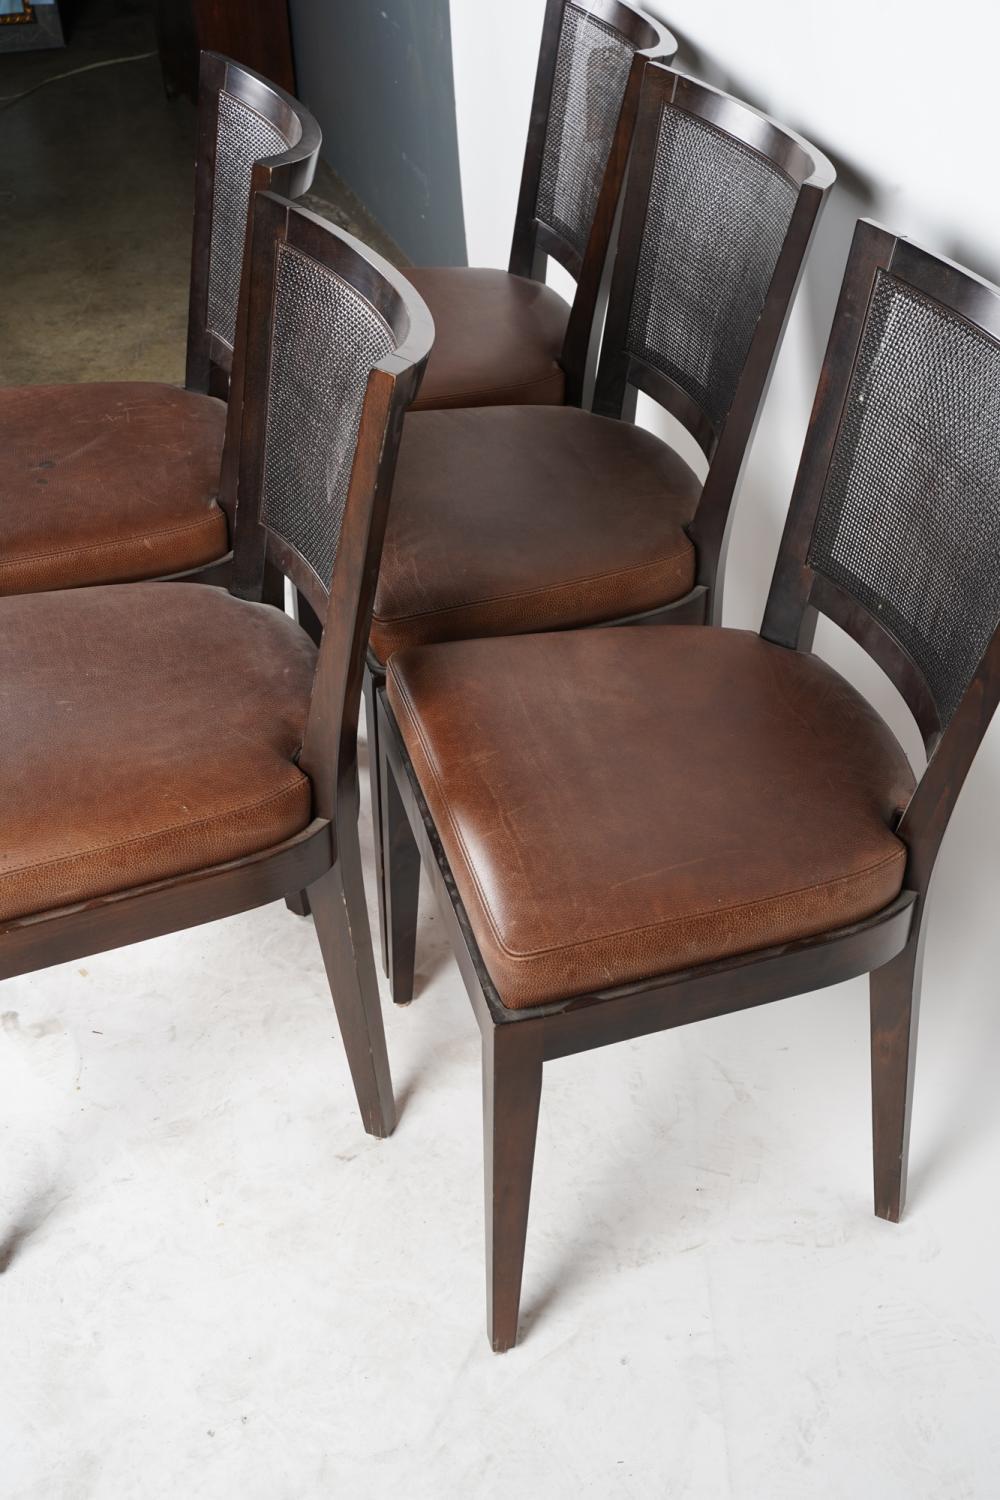 Birch Set Six Promemoria Caffe Caned Leather Dining Chairs Contemporary Italian C 2000 For Sale